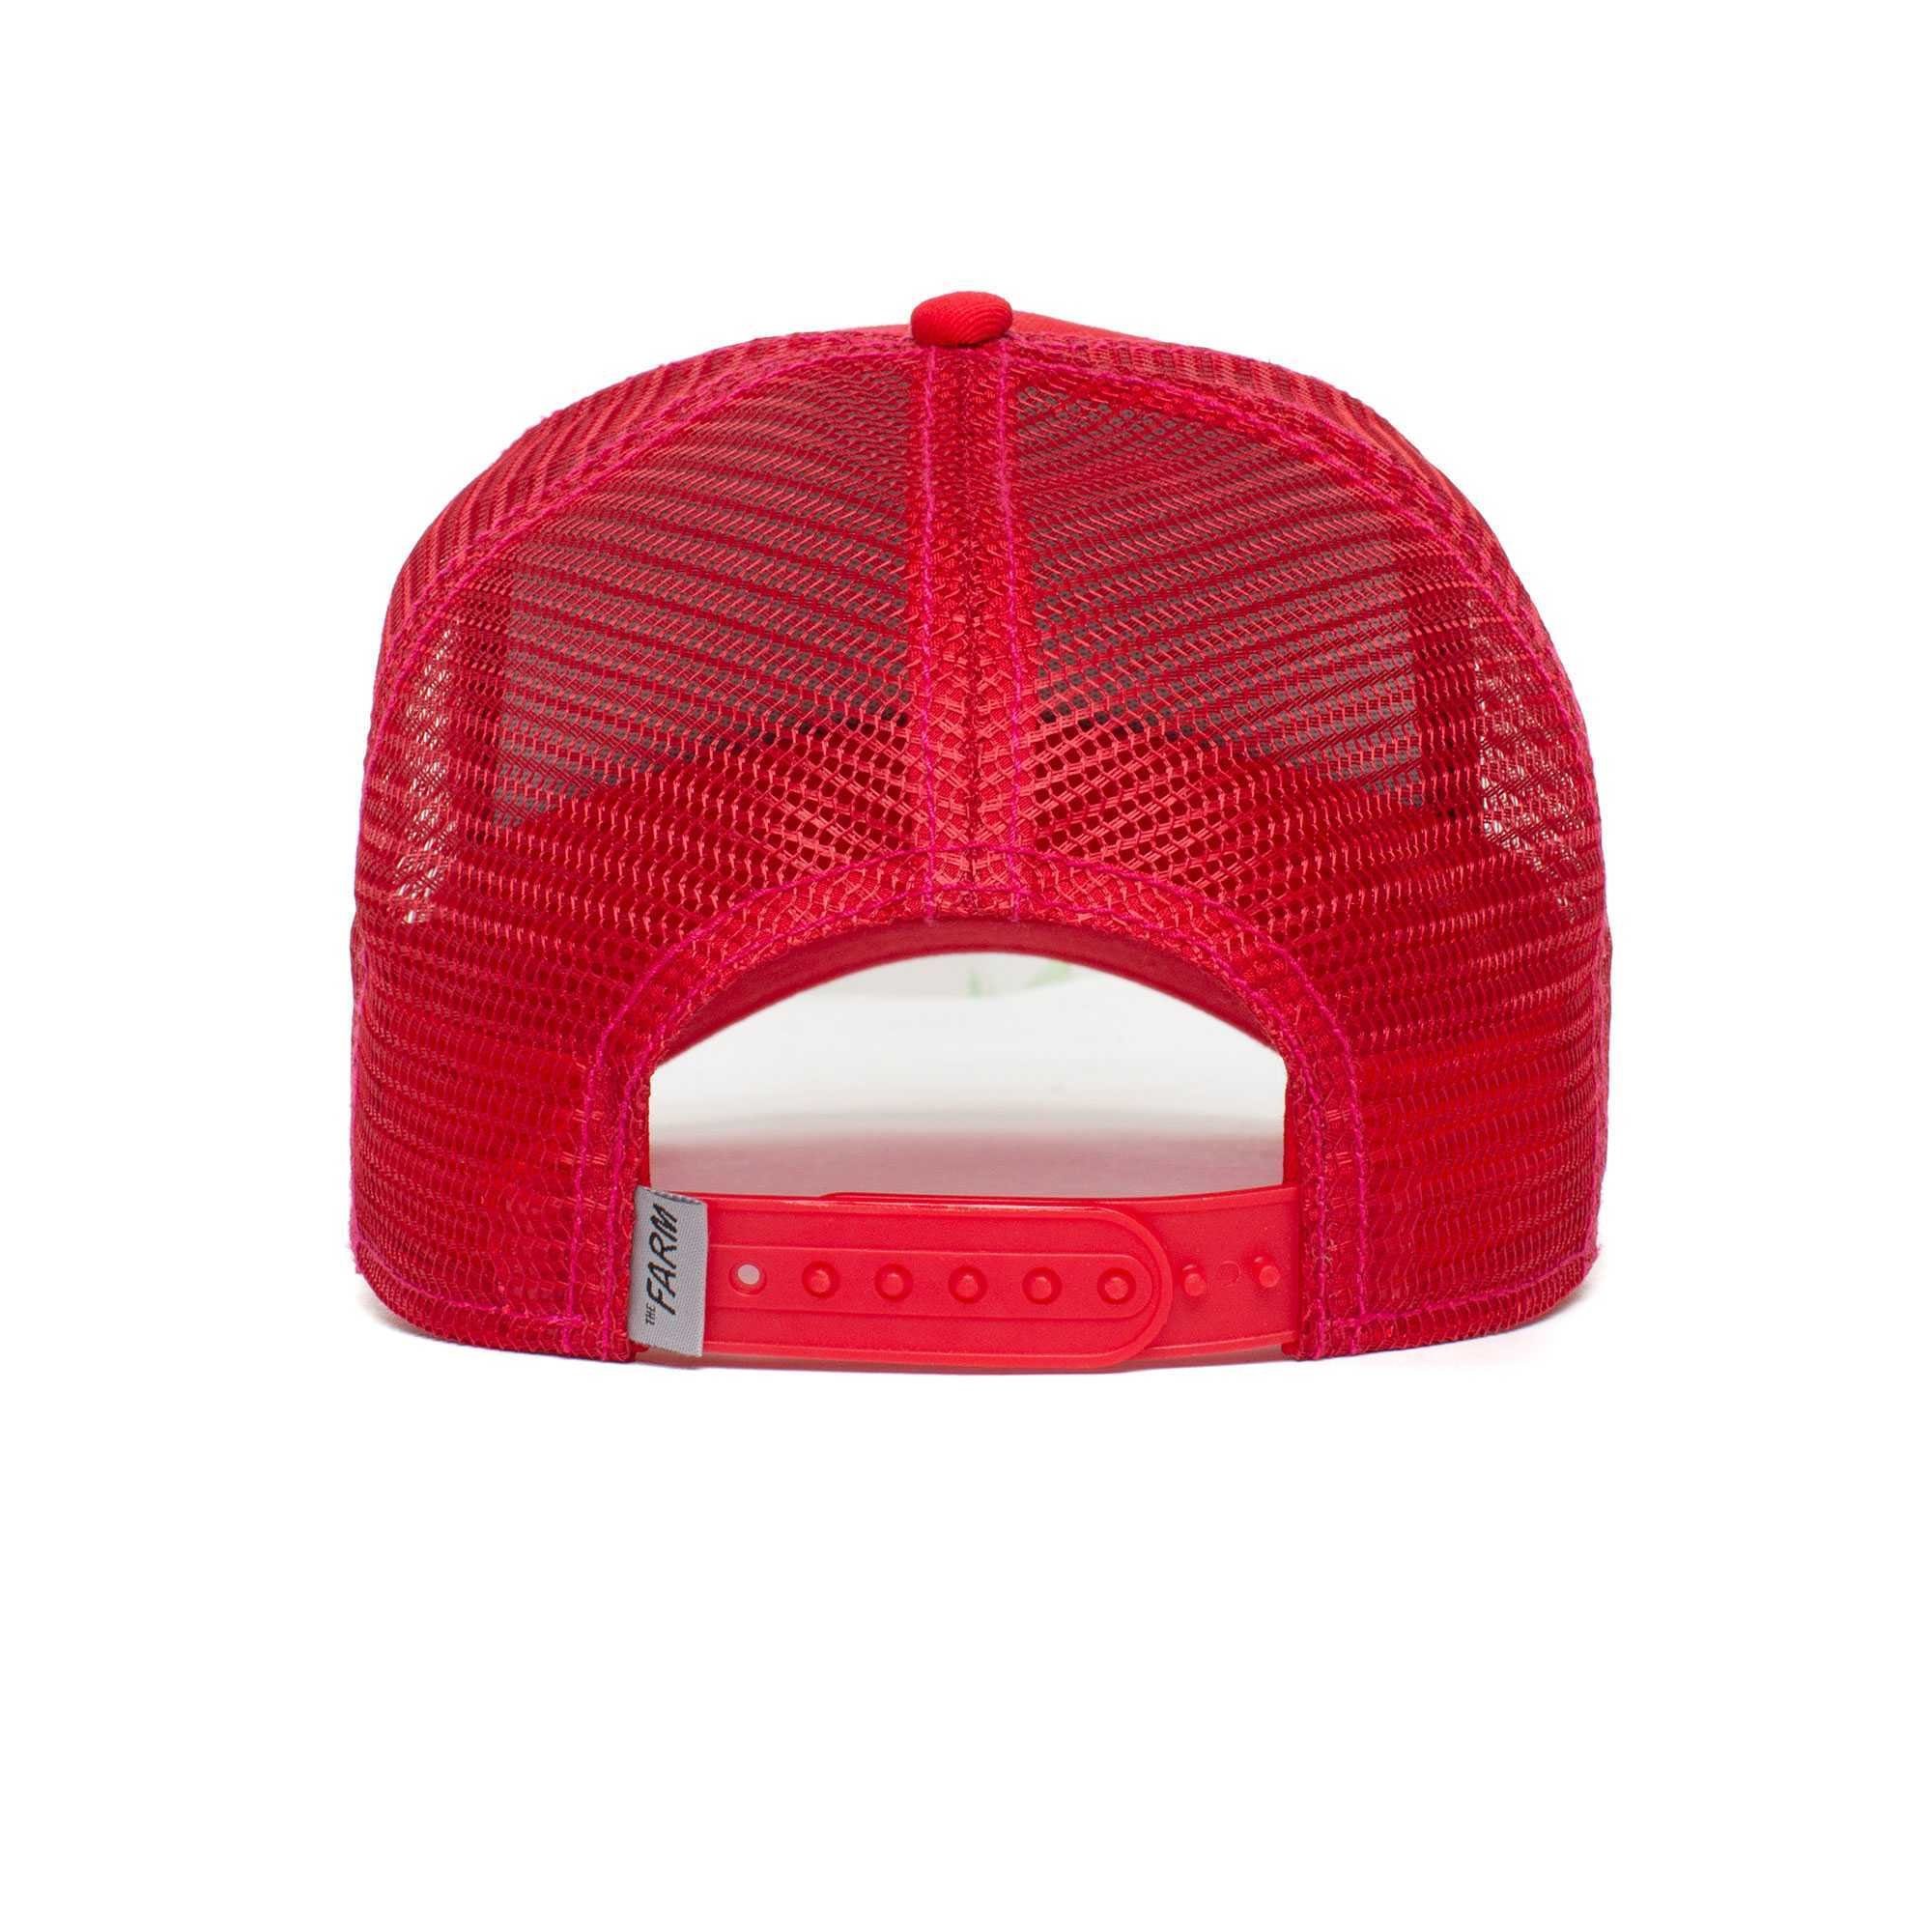 Cap Kappe, One red Bros. Cap Frontpatch, - Unisex GOORIN Baseball Cock Size The Trucker